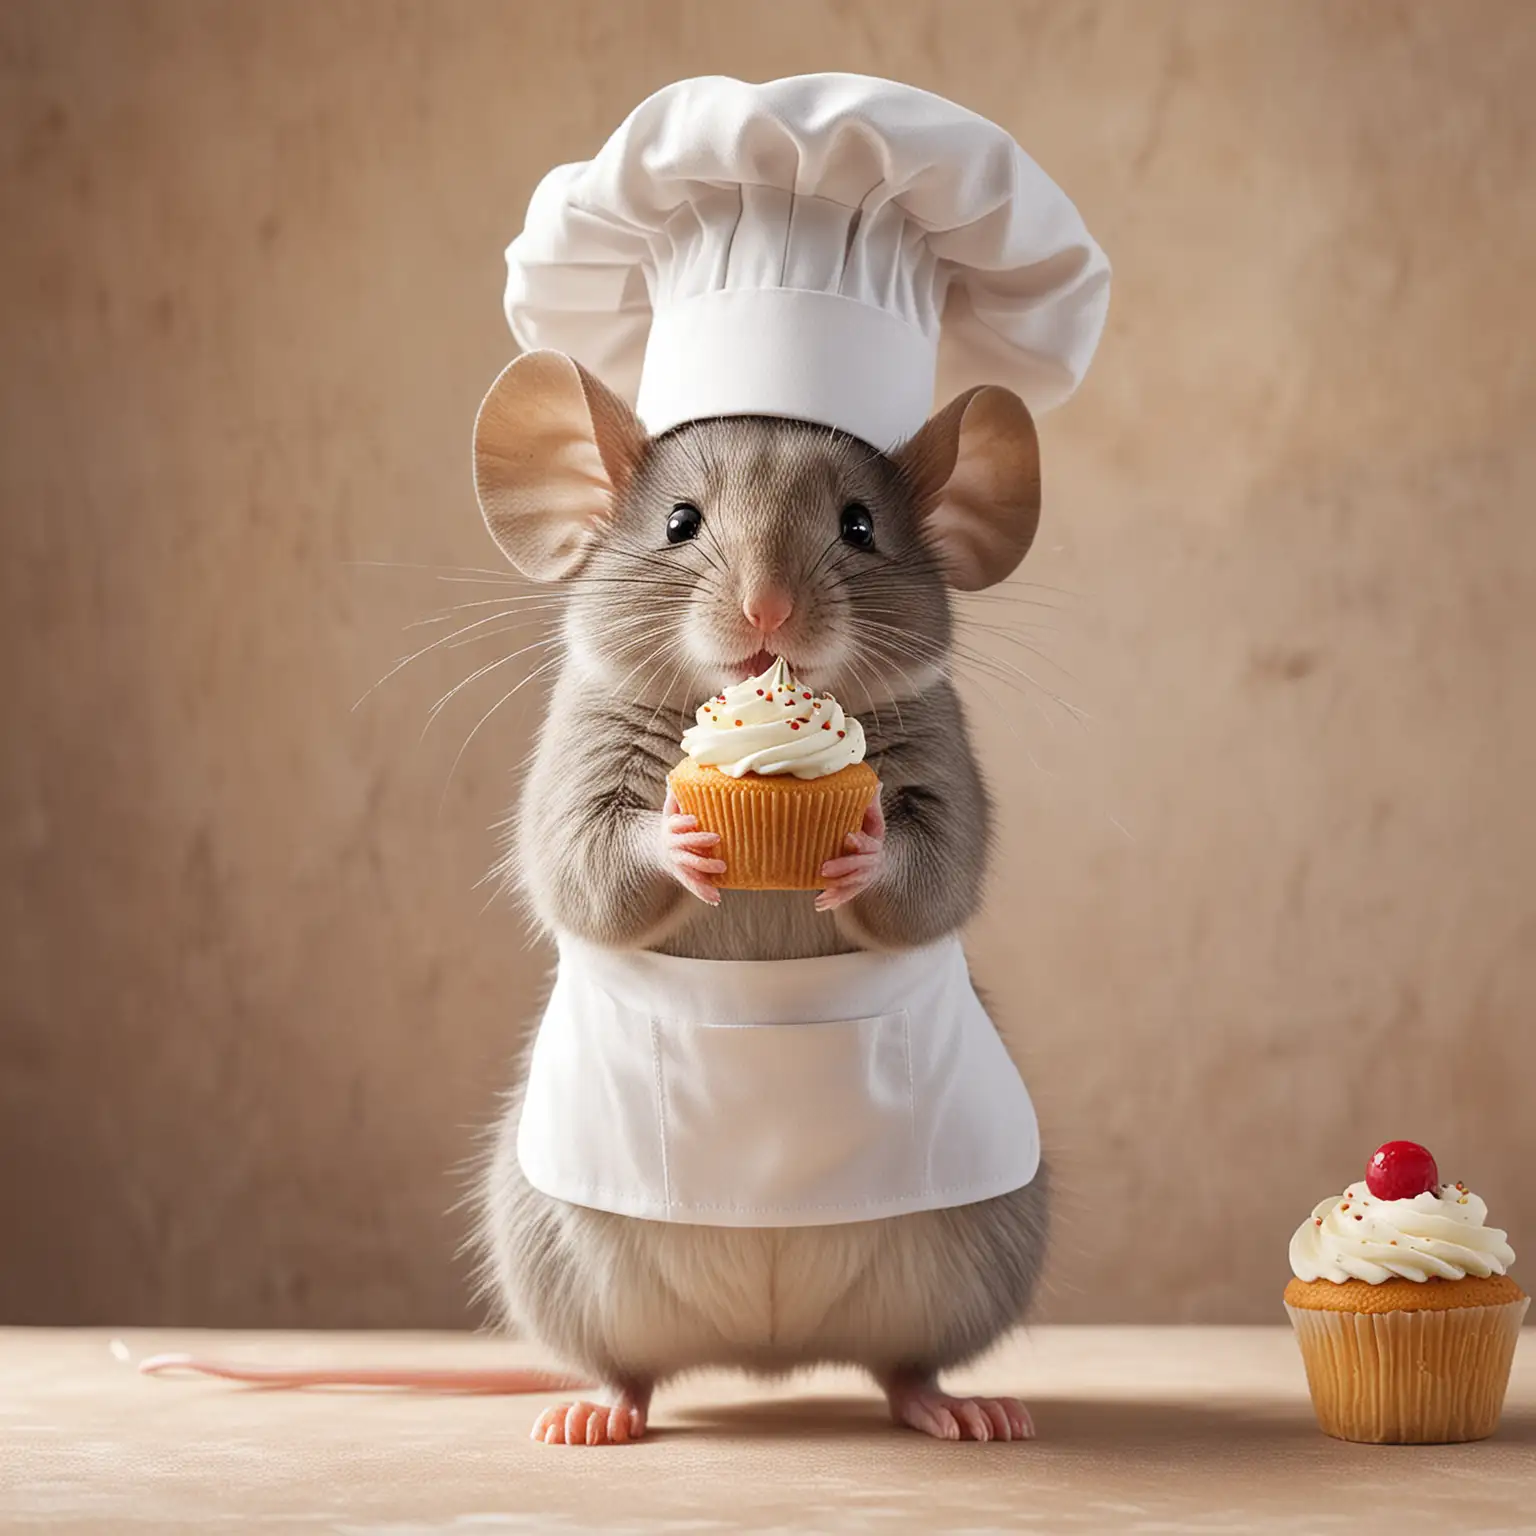 Adorable Mouse Chef Holding Cupcake Whimsical Kitchen Character Illustration